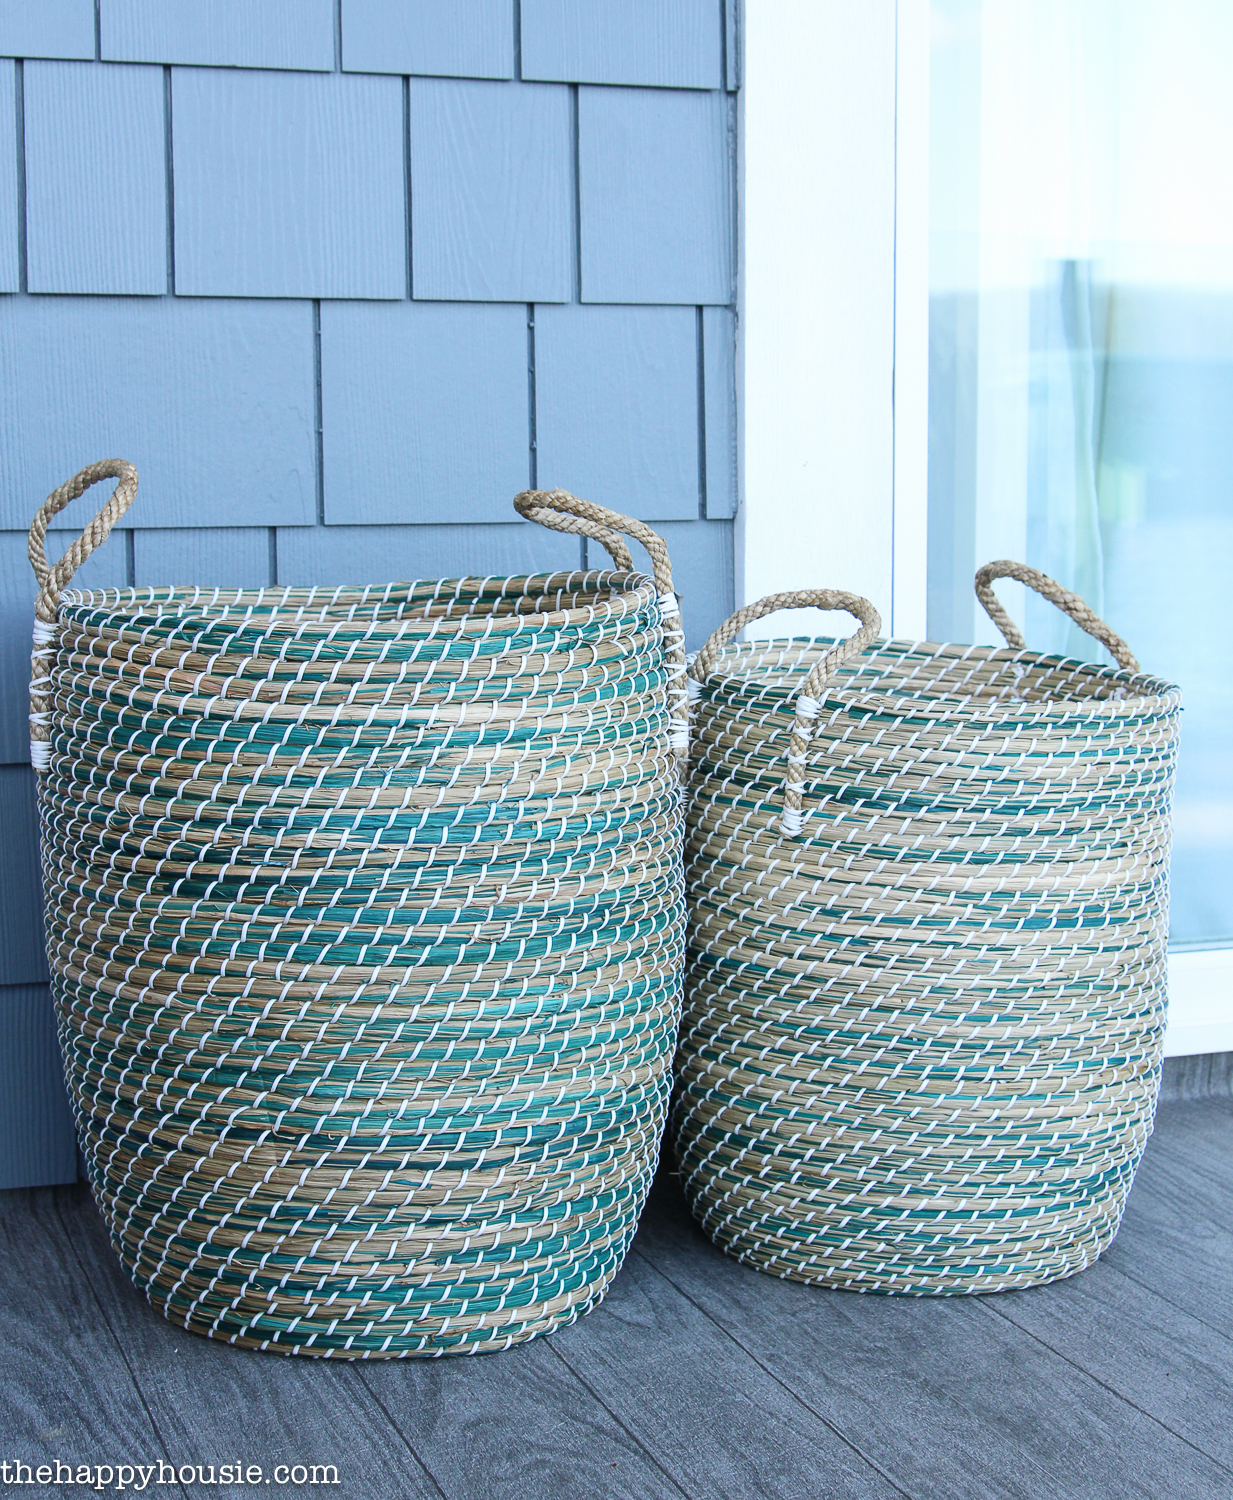 Up close look at the woven baskets.